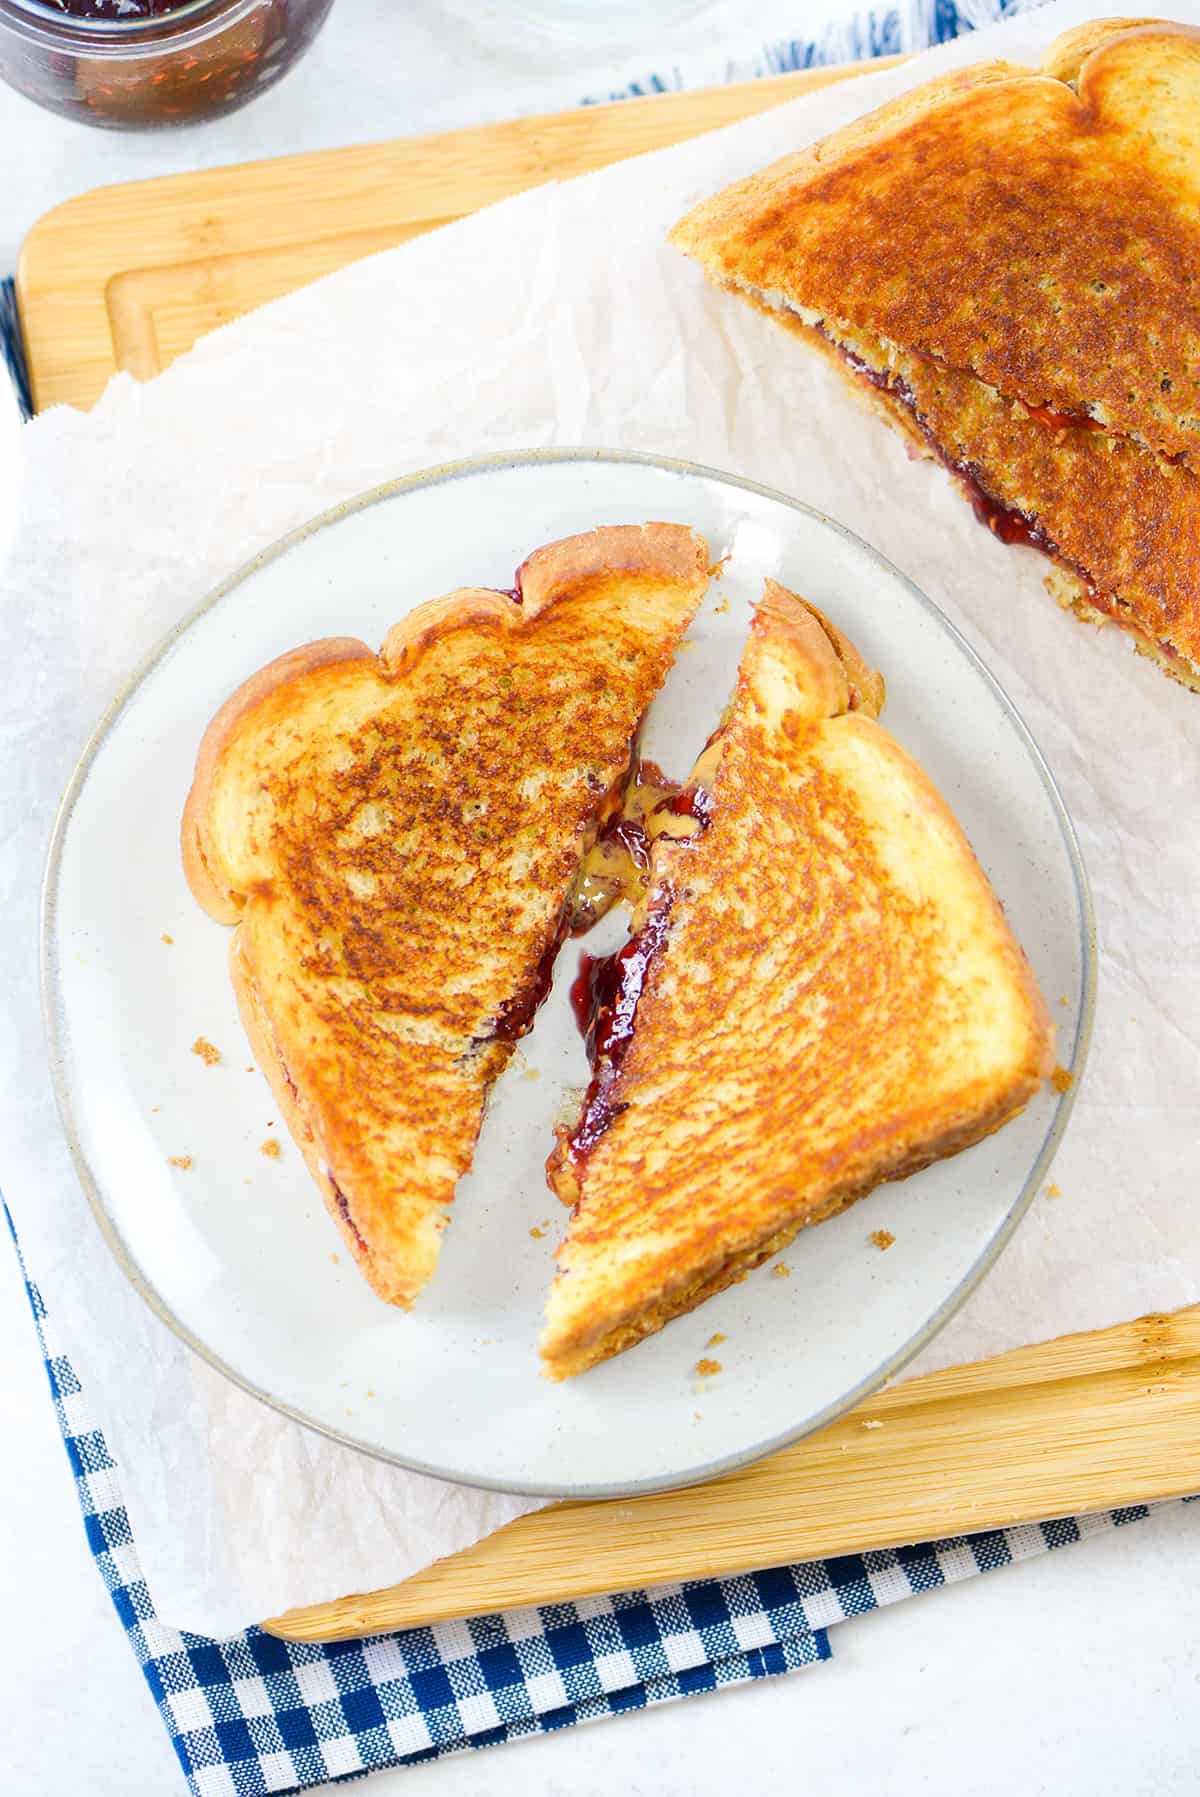 Grilled peanut butter and jelly sandwich on white plate.